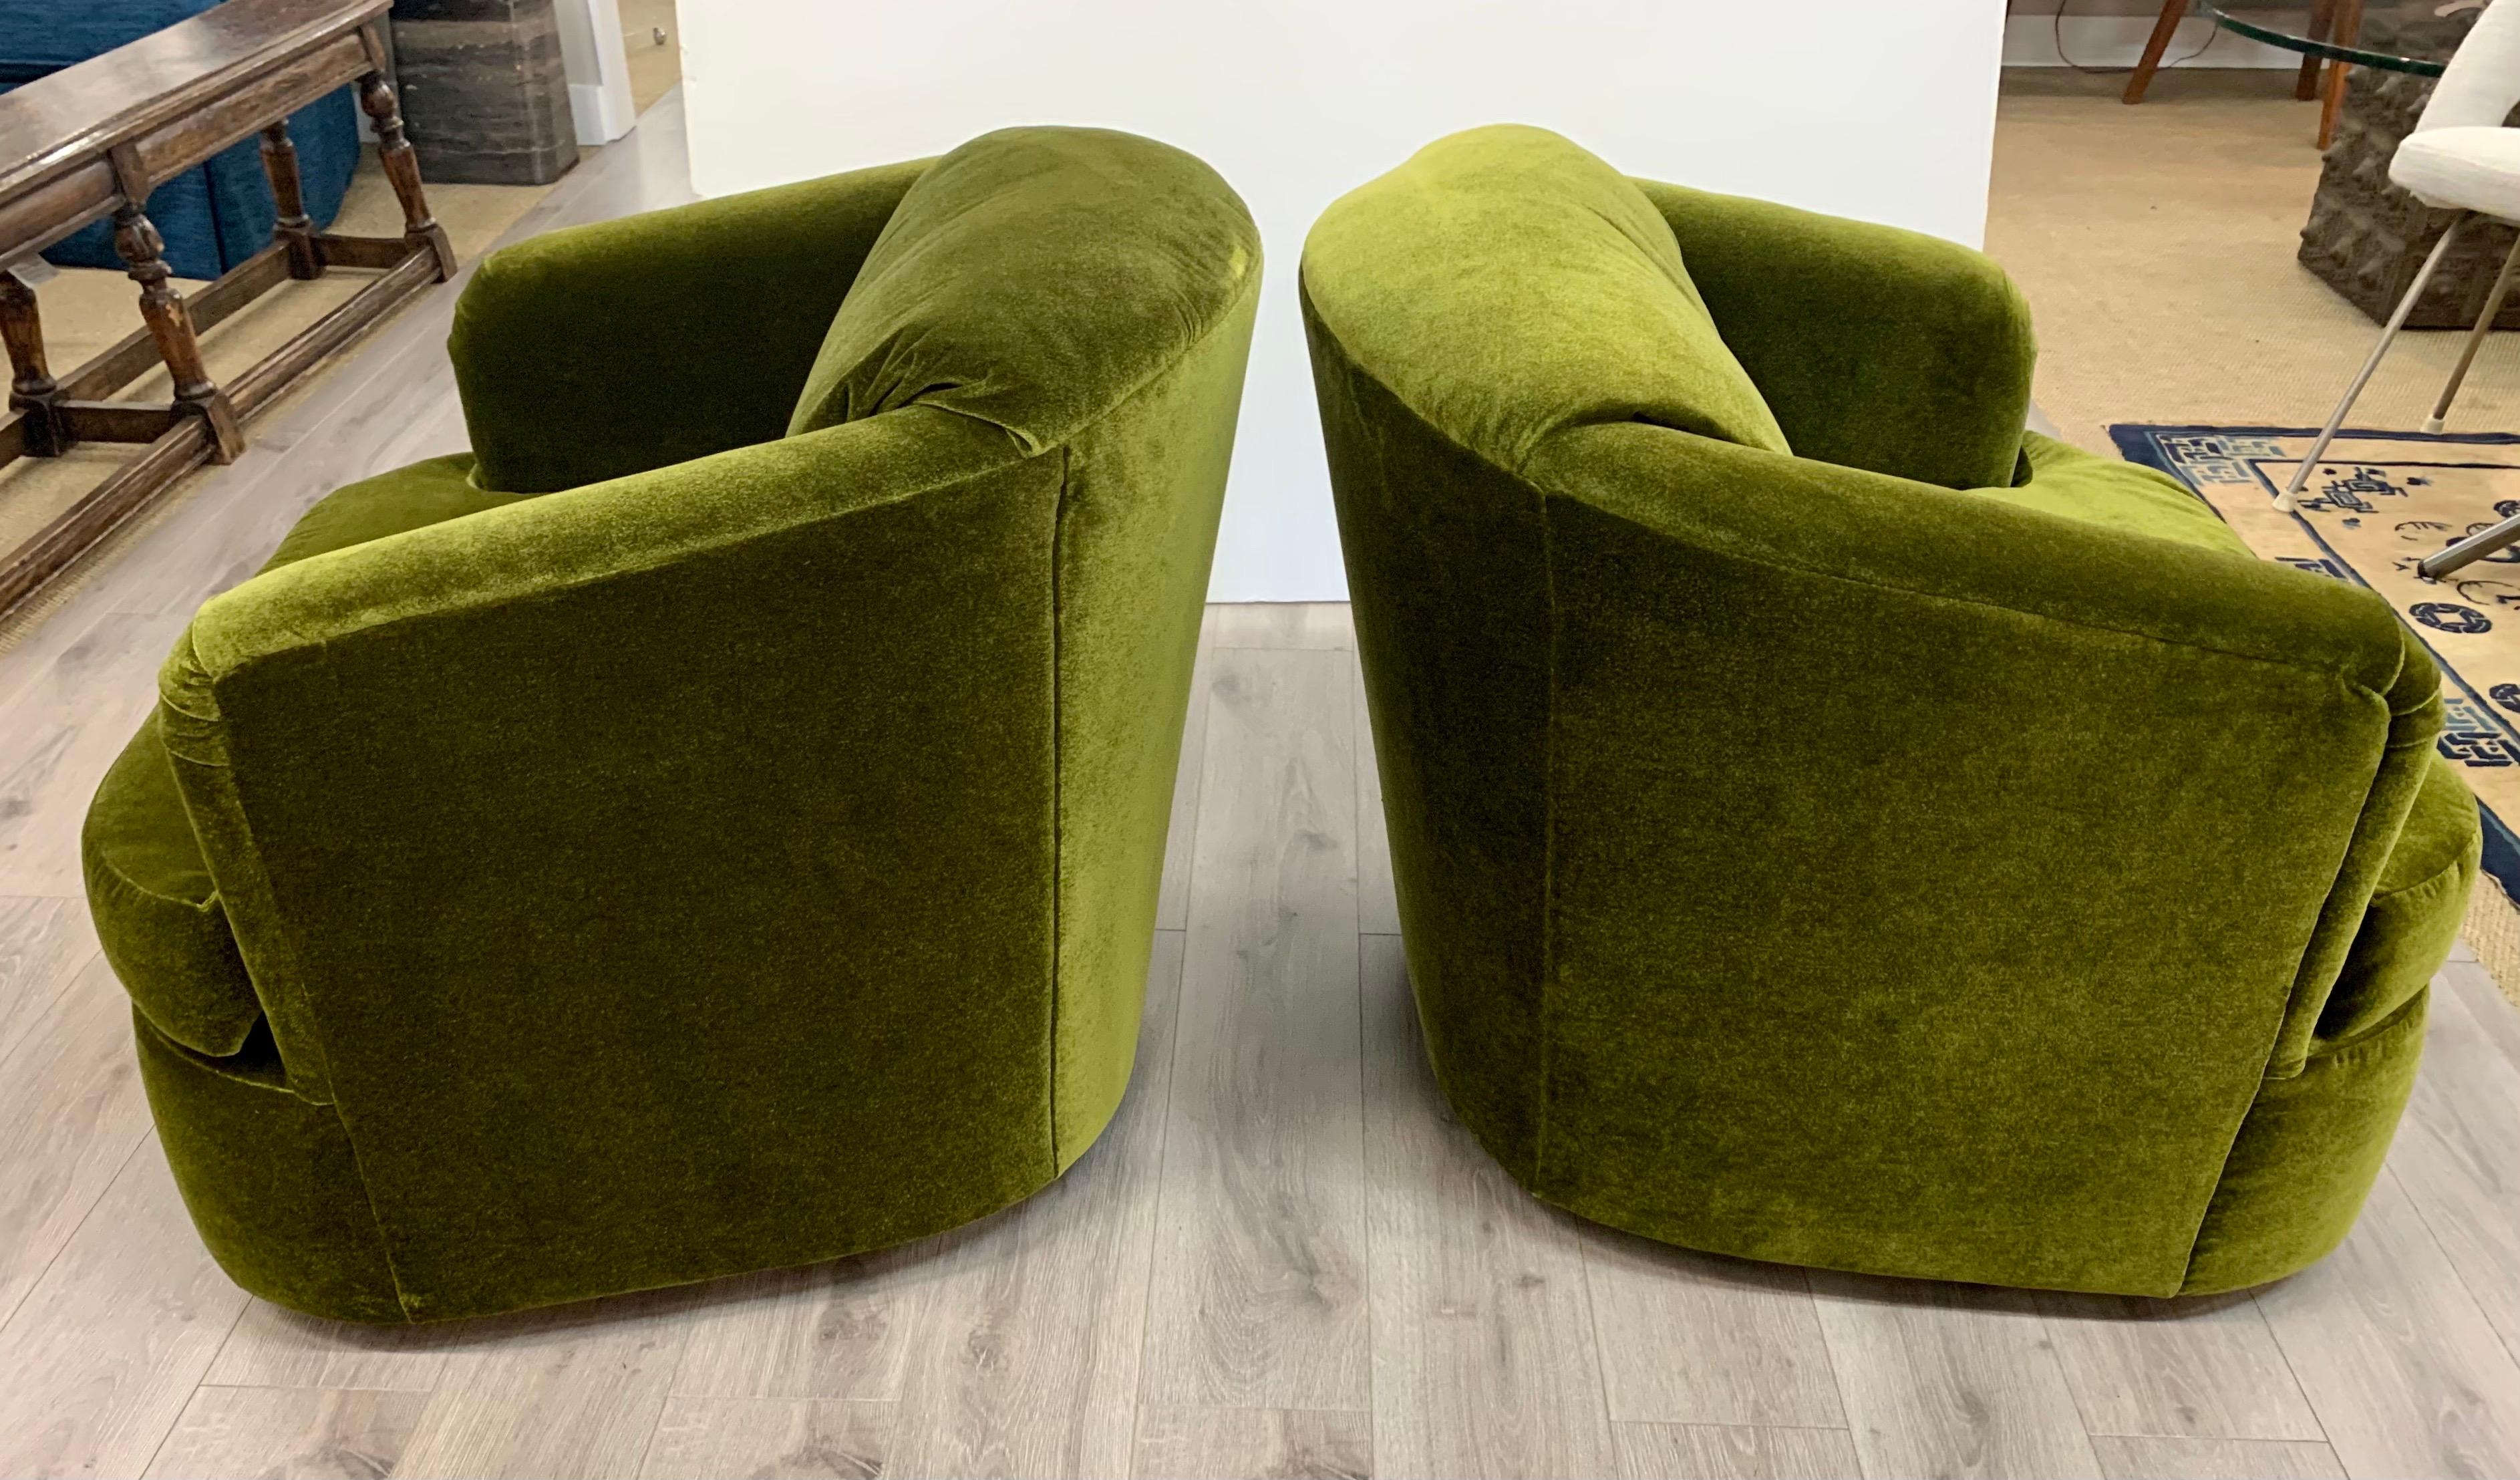 Pair of Mid-Century Modern barrel back swivel chairs with new olive green mohair upholstery.